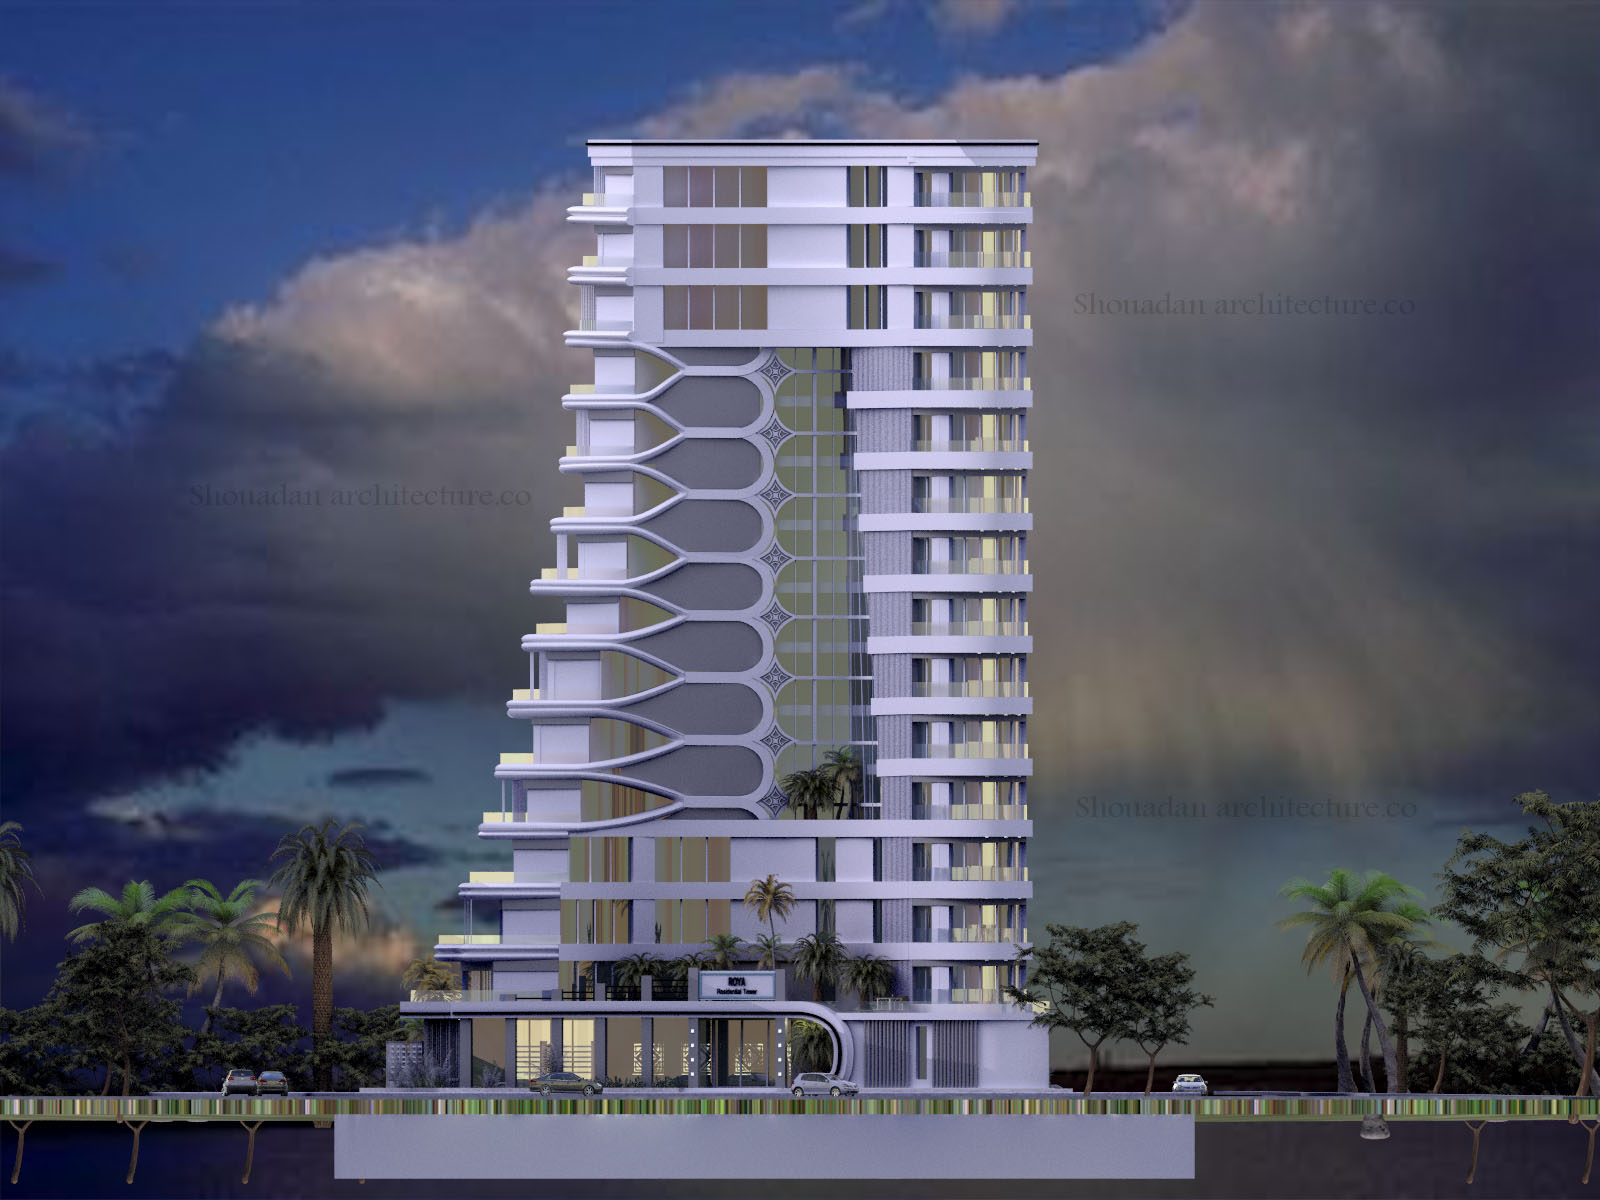 Roya Residential Tower Design Competition